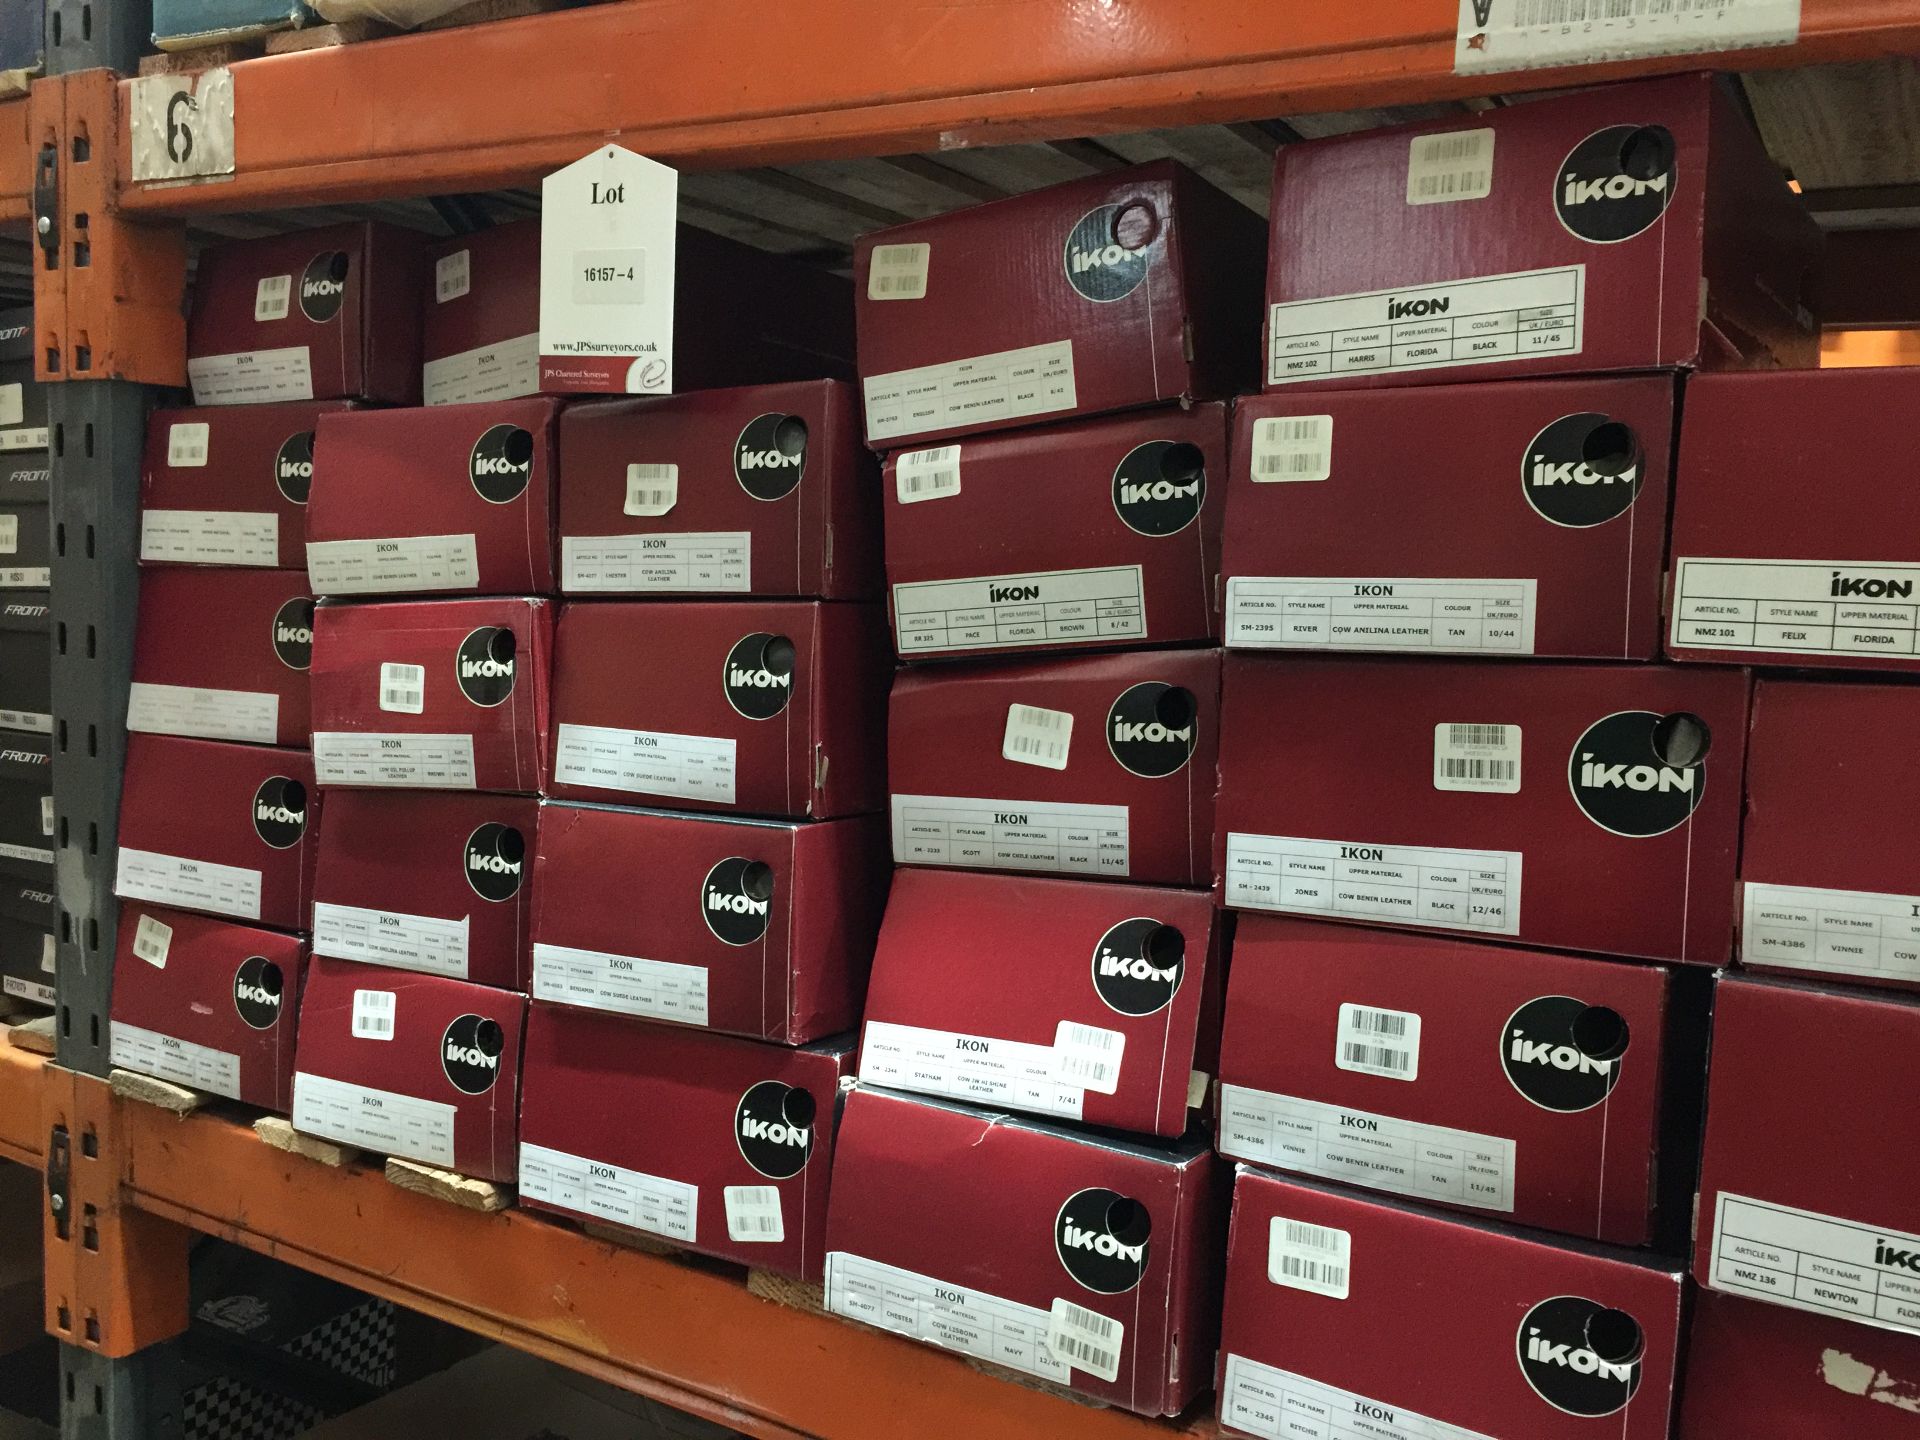 28 x Ikon Mens Formal Shoes/Trainers Mixed Sizes, Styles and Colours Size Ranging from UK 7 - UK 12 - Image 7 of 7